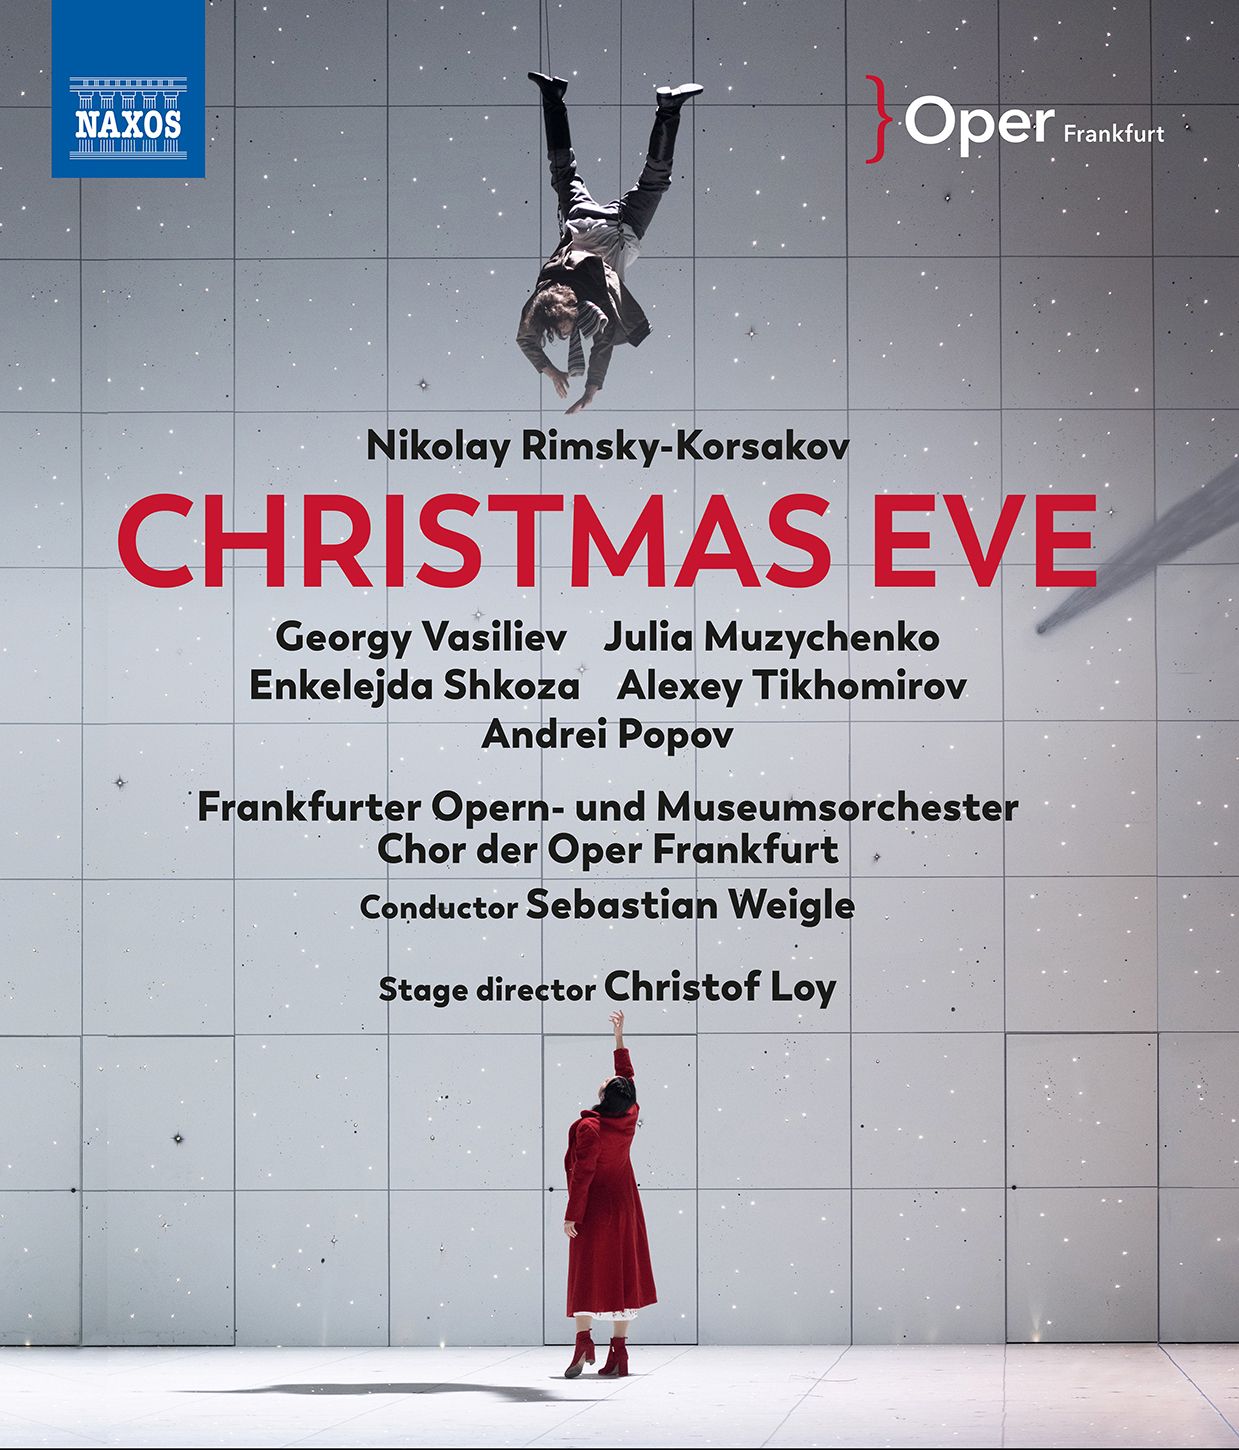 It's Christmas Eve: what better than Rimsky's opera?